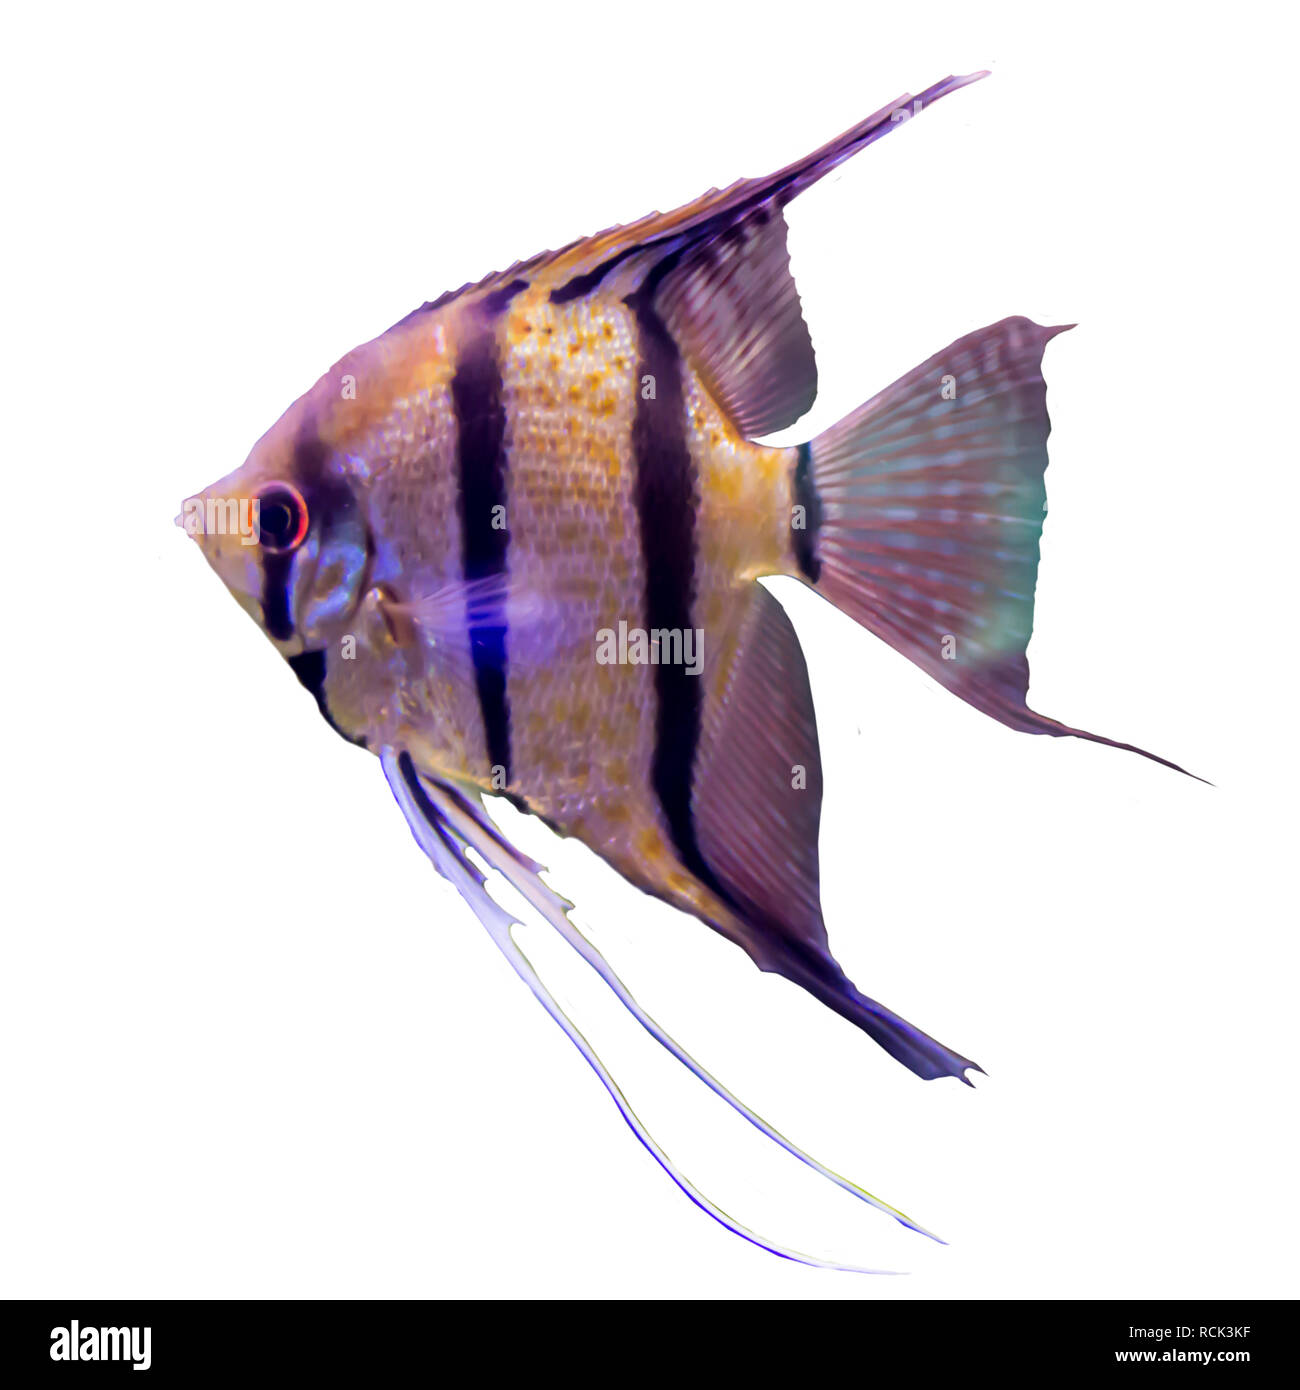 Tropical striped freshwater fish in an aquarium. Isolated photo on